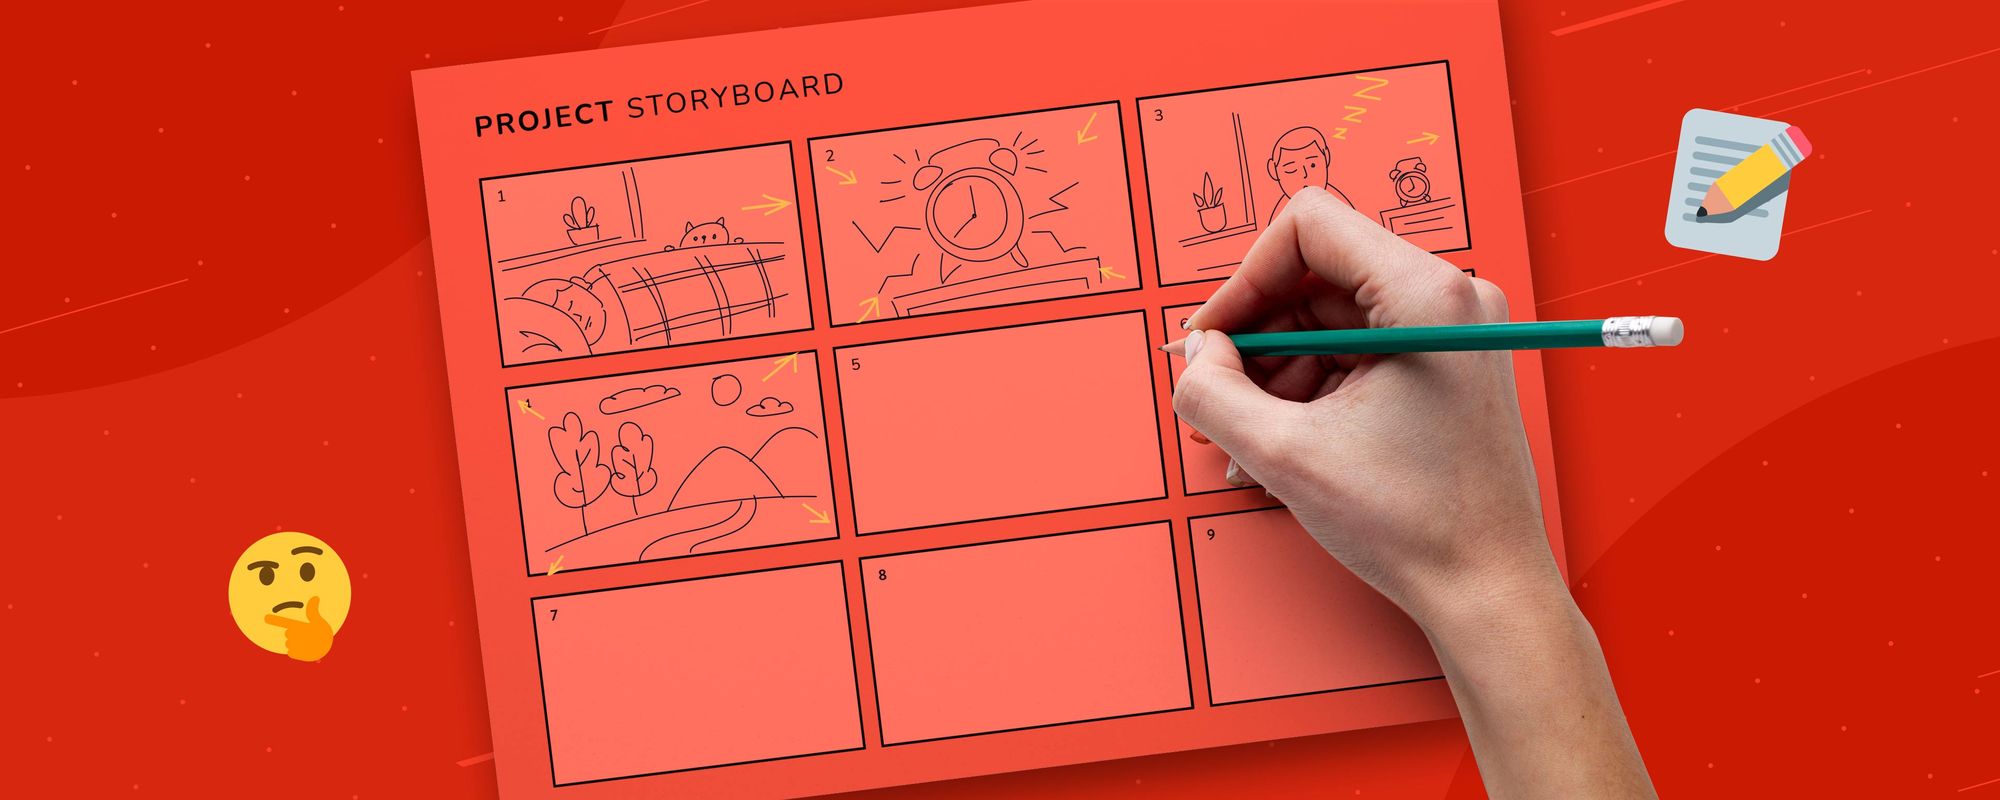 Image of a hand filling out a storyboard as part of planning a YouTube video.